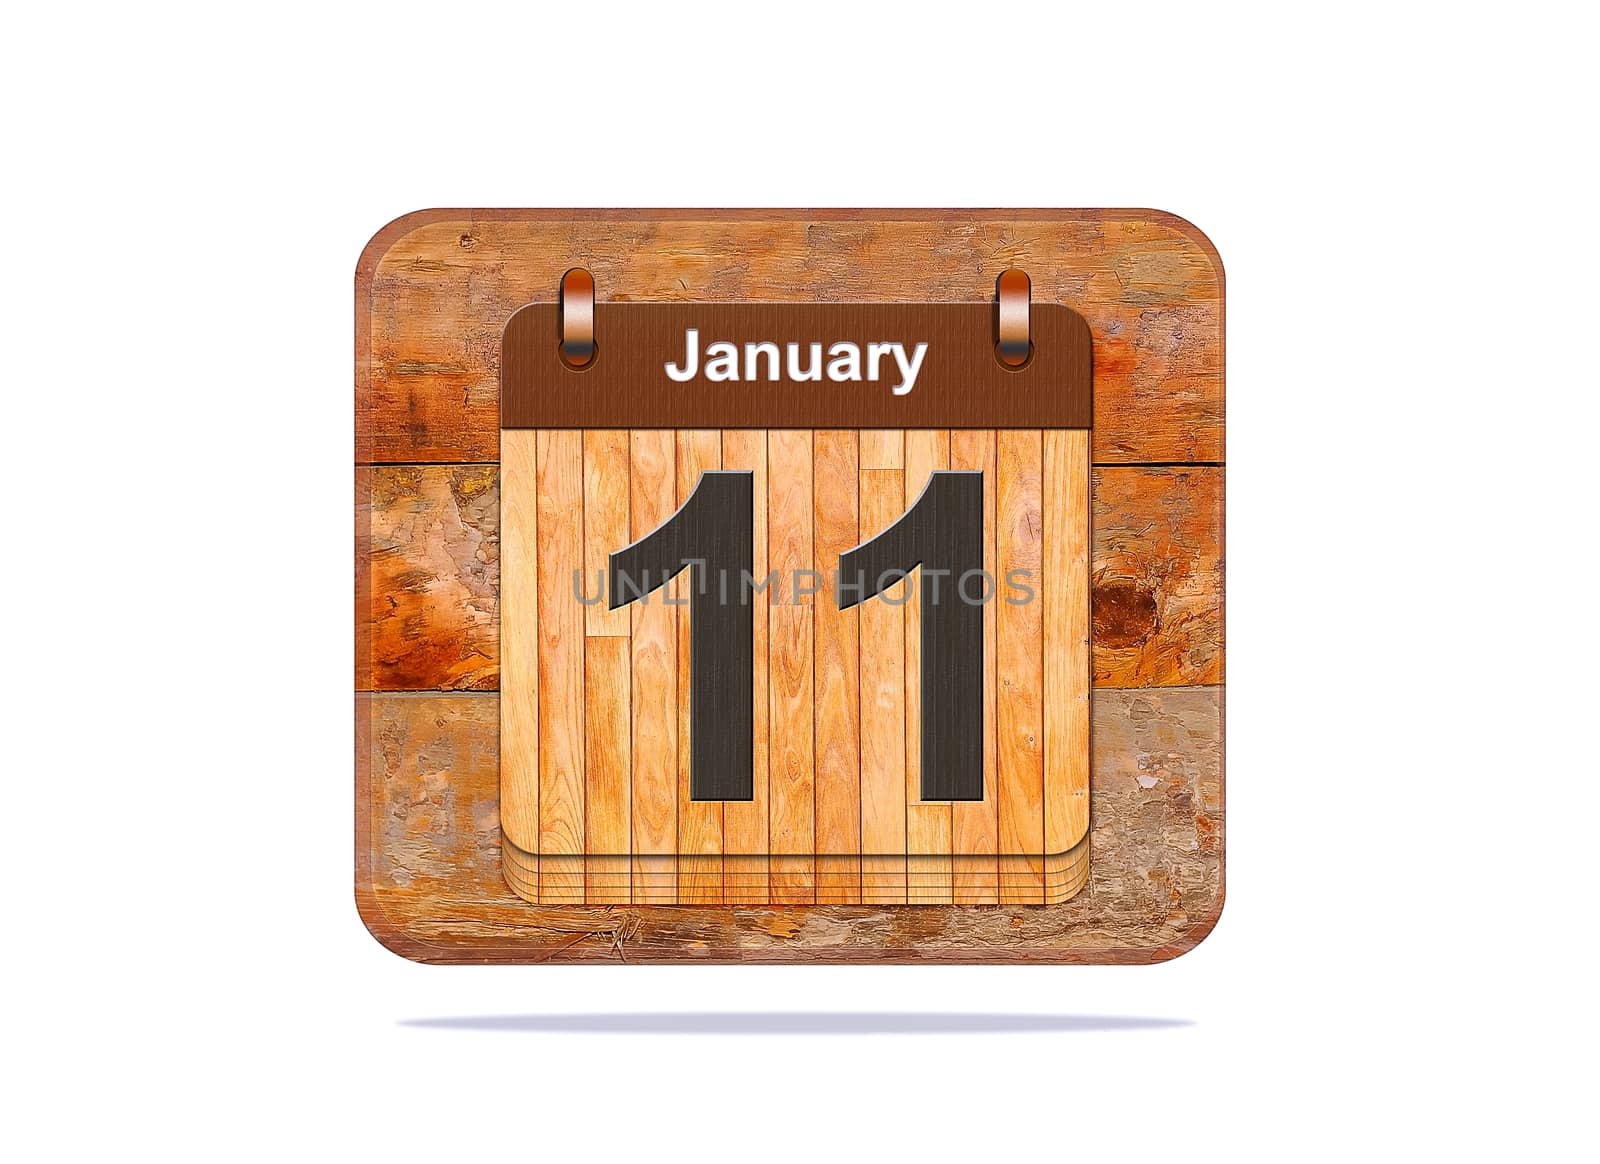 Calendar with the date of January 11.